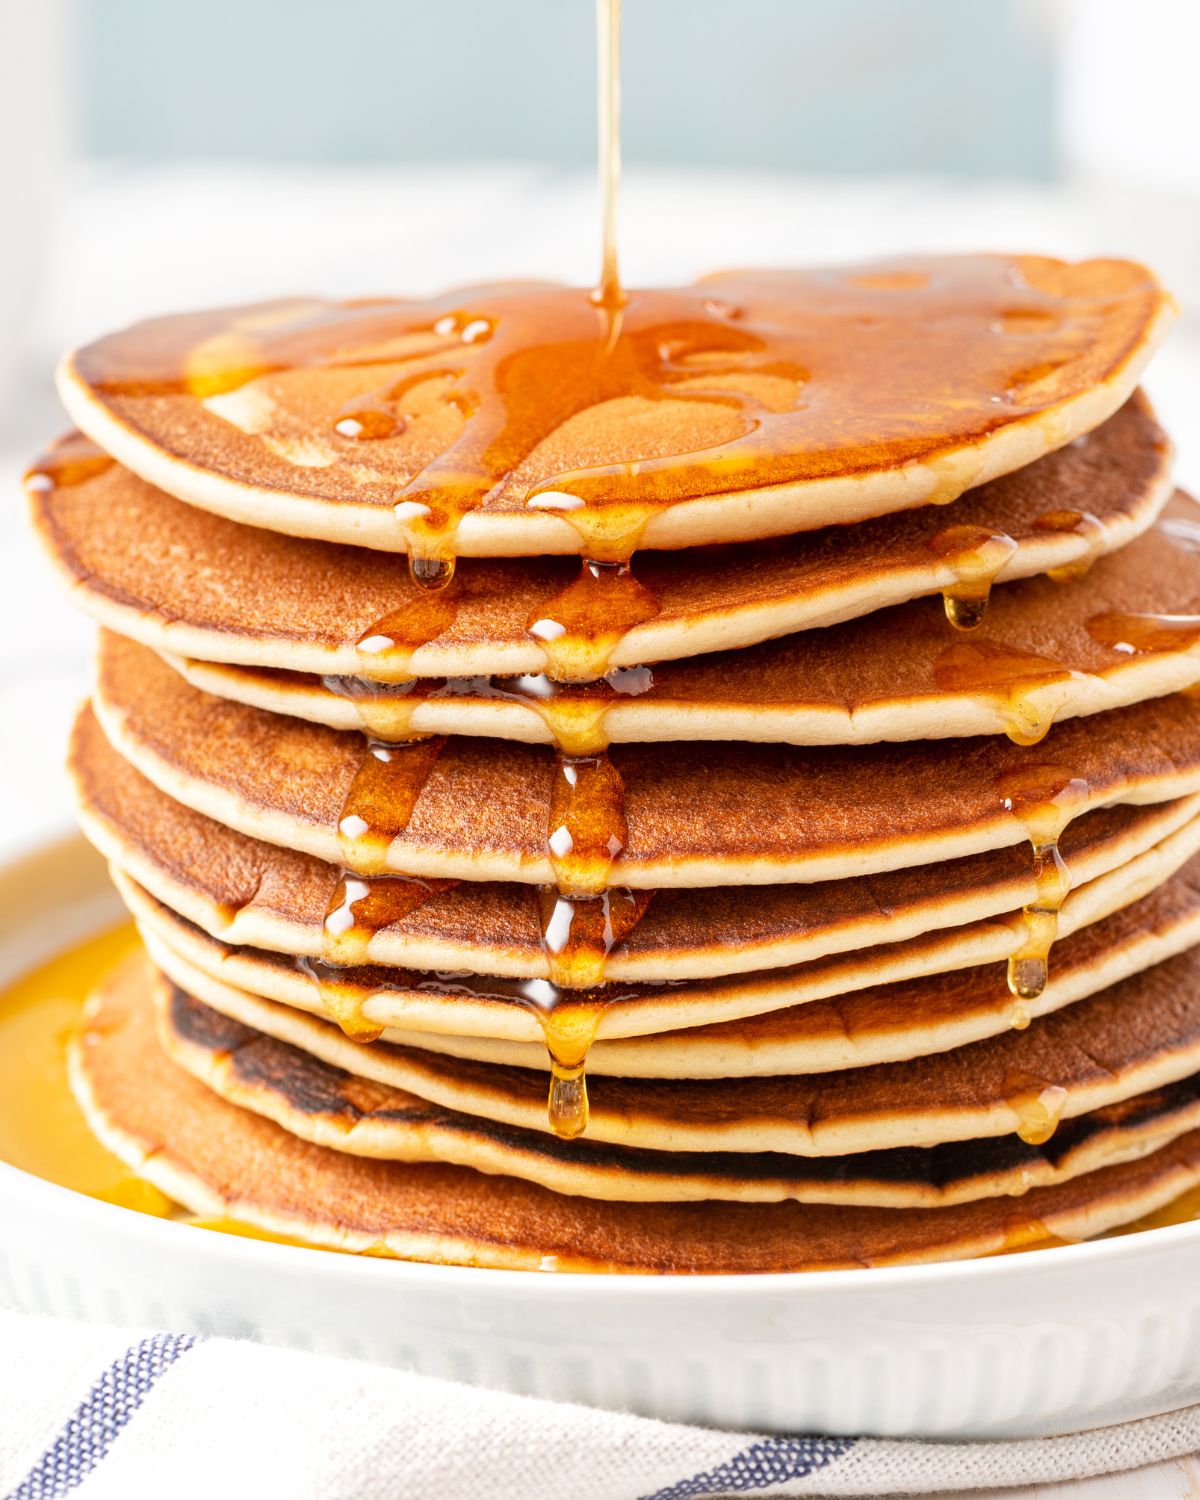 A stack of pancakes with syrup.